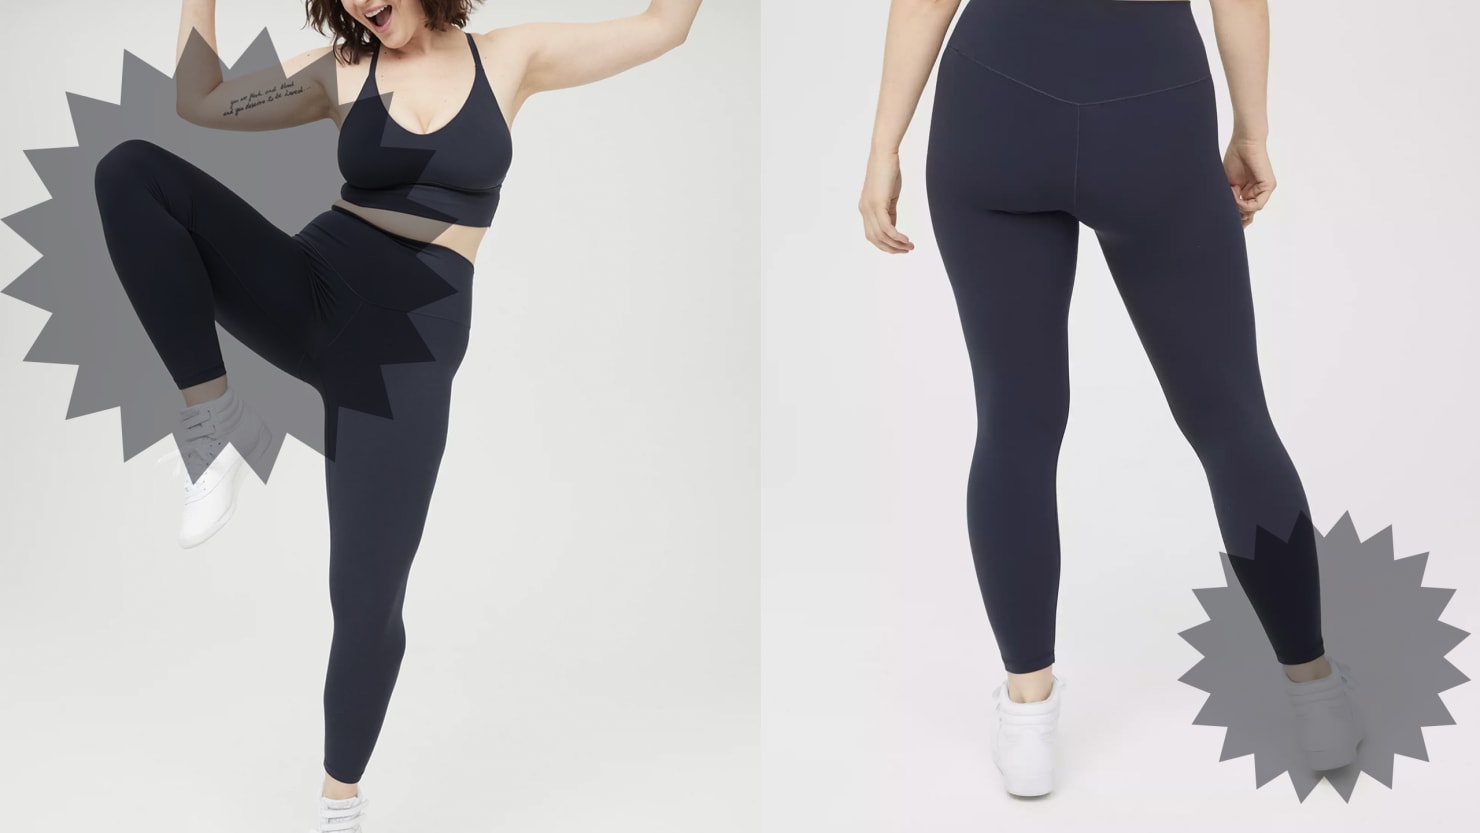 Not anywhere near lululemon thickness but exactly the same as aerie! C